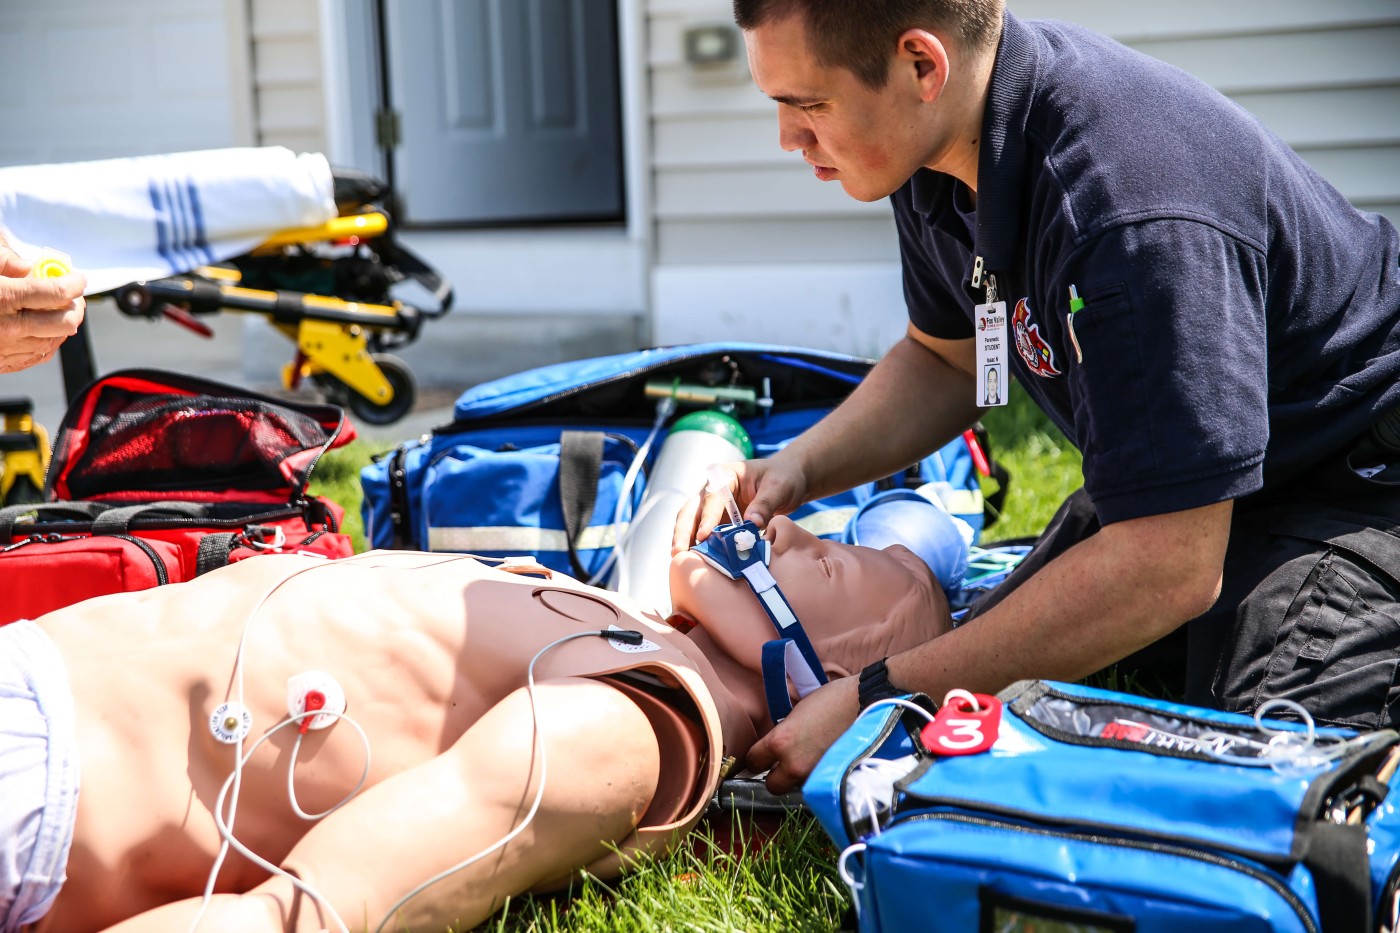 Paramedic attending to patient